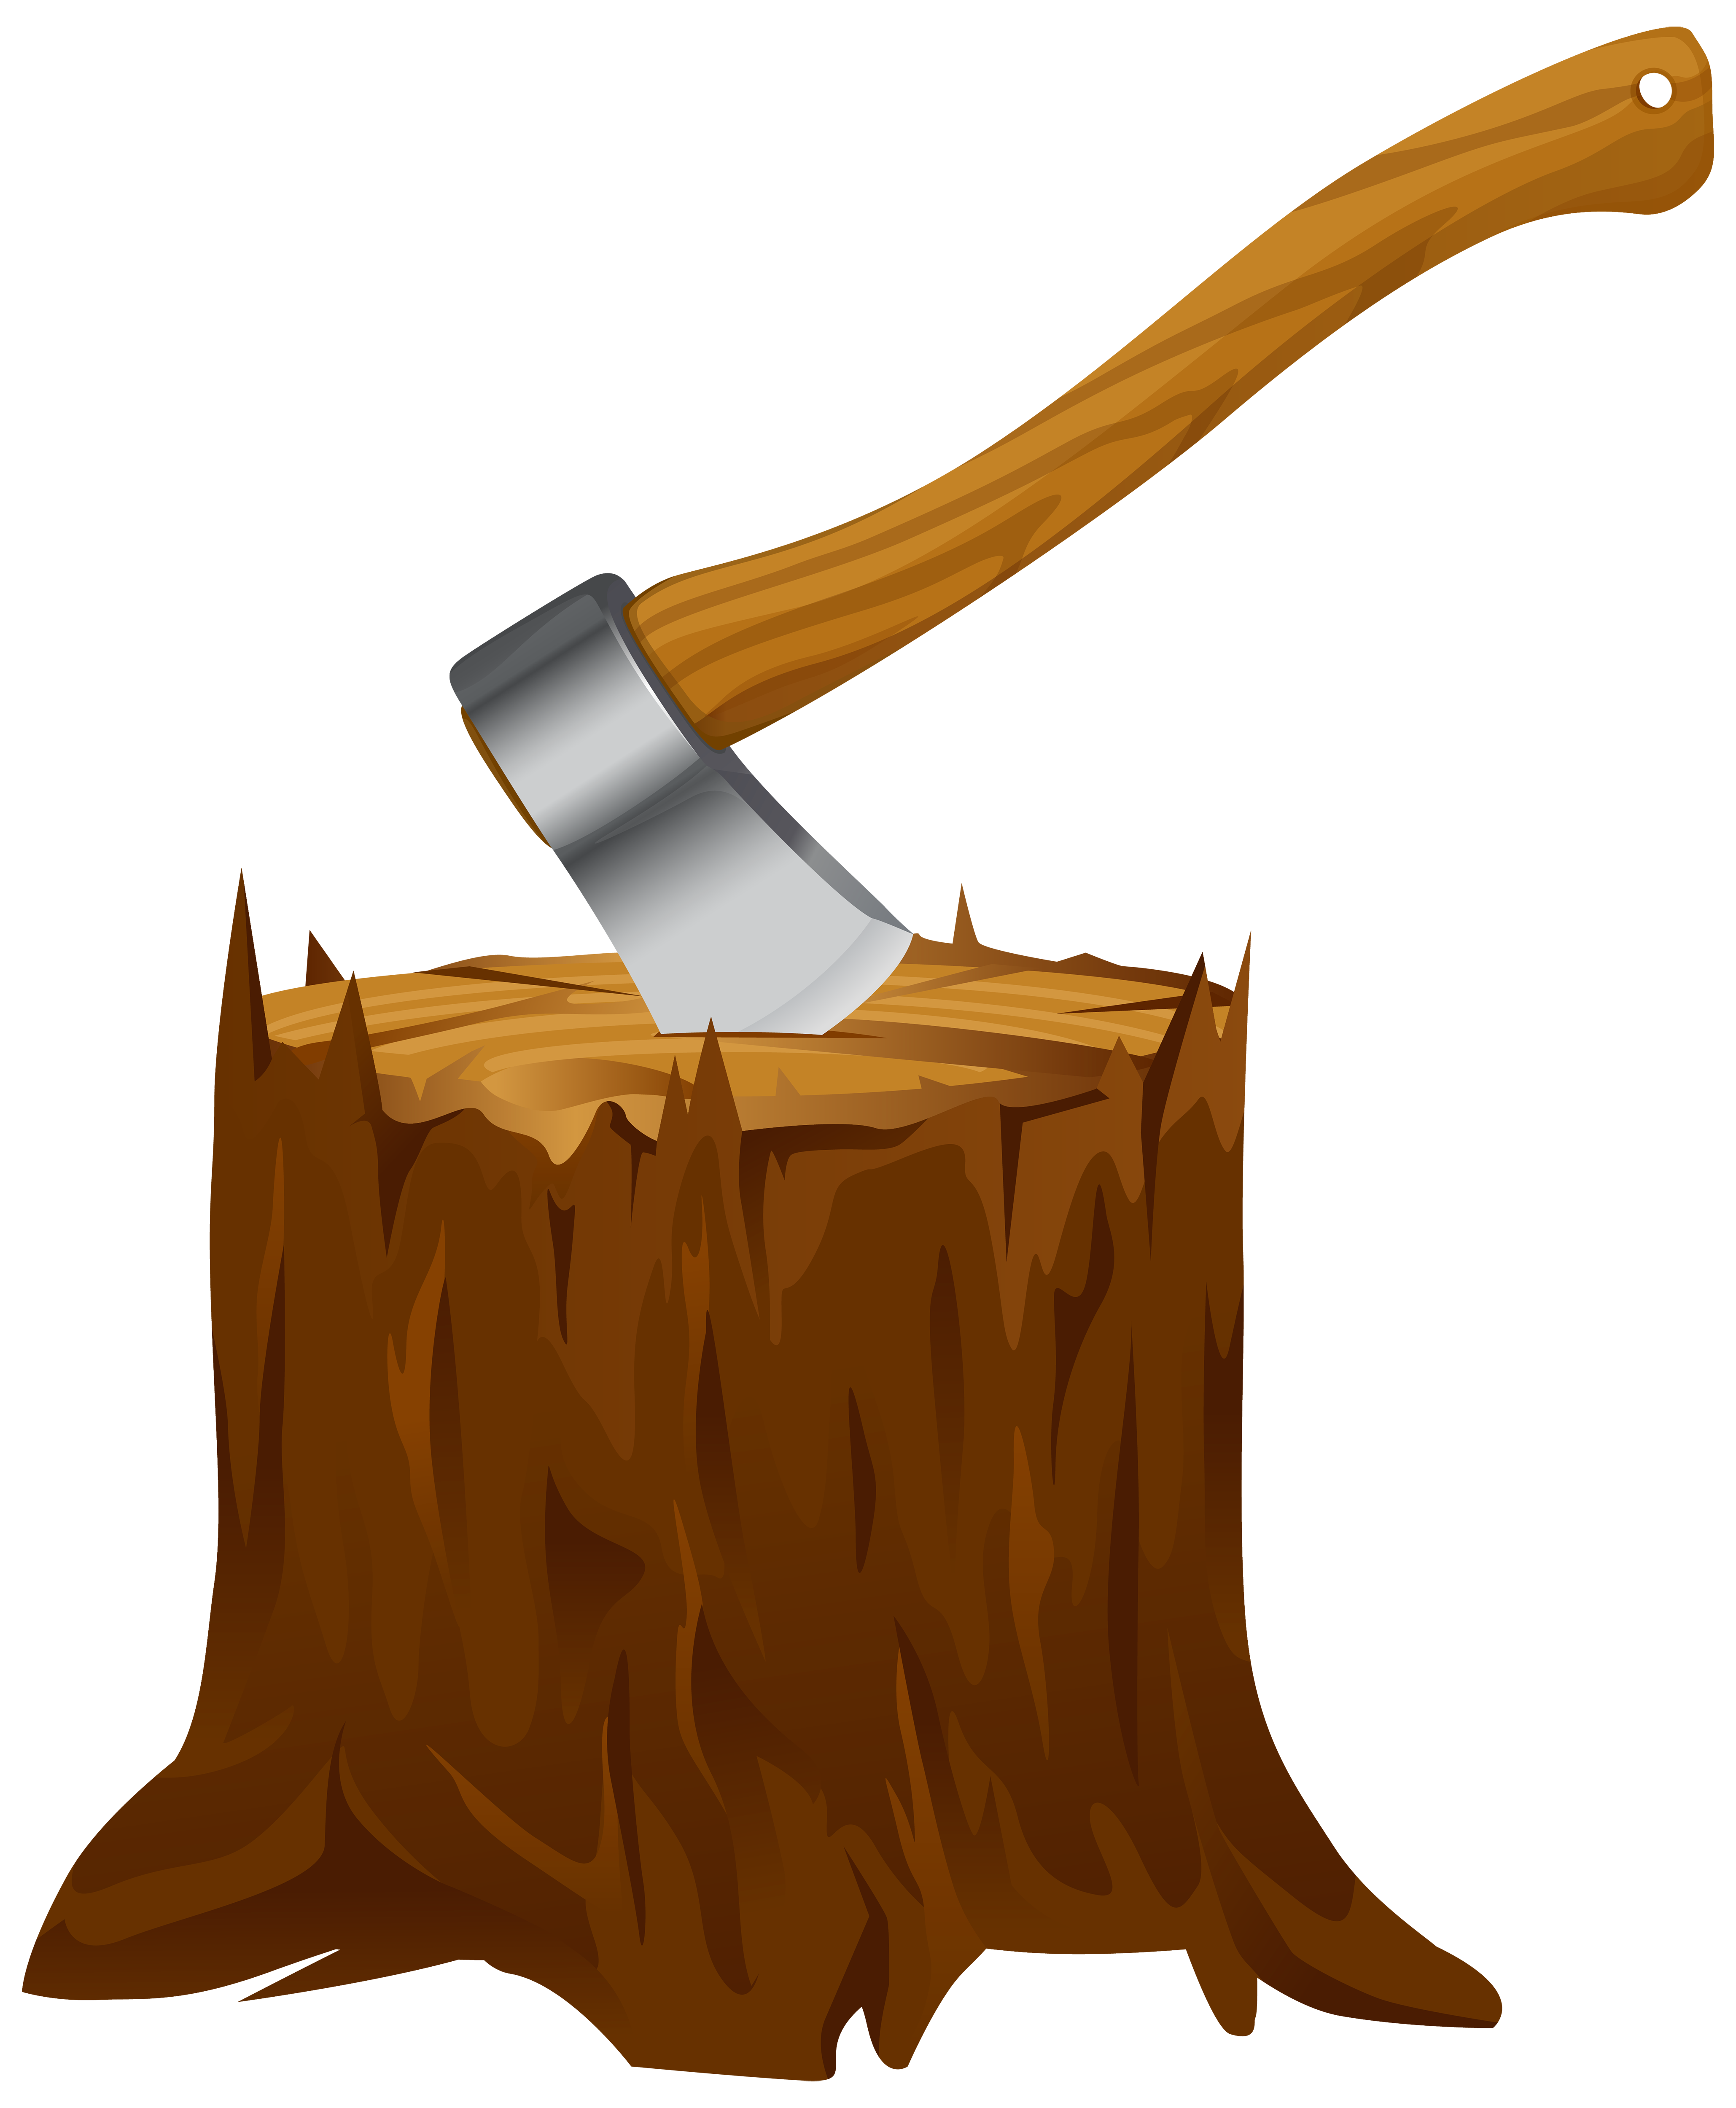 Tree Stump with Axe Clipart PNG Image - ClipArt Best - ClipArt Best